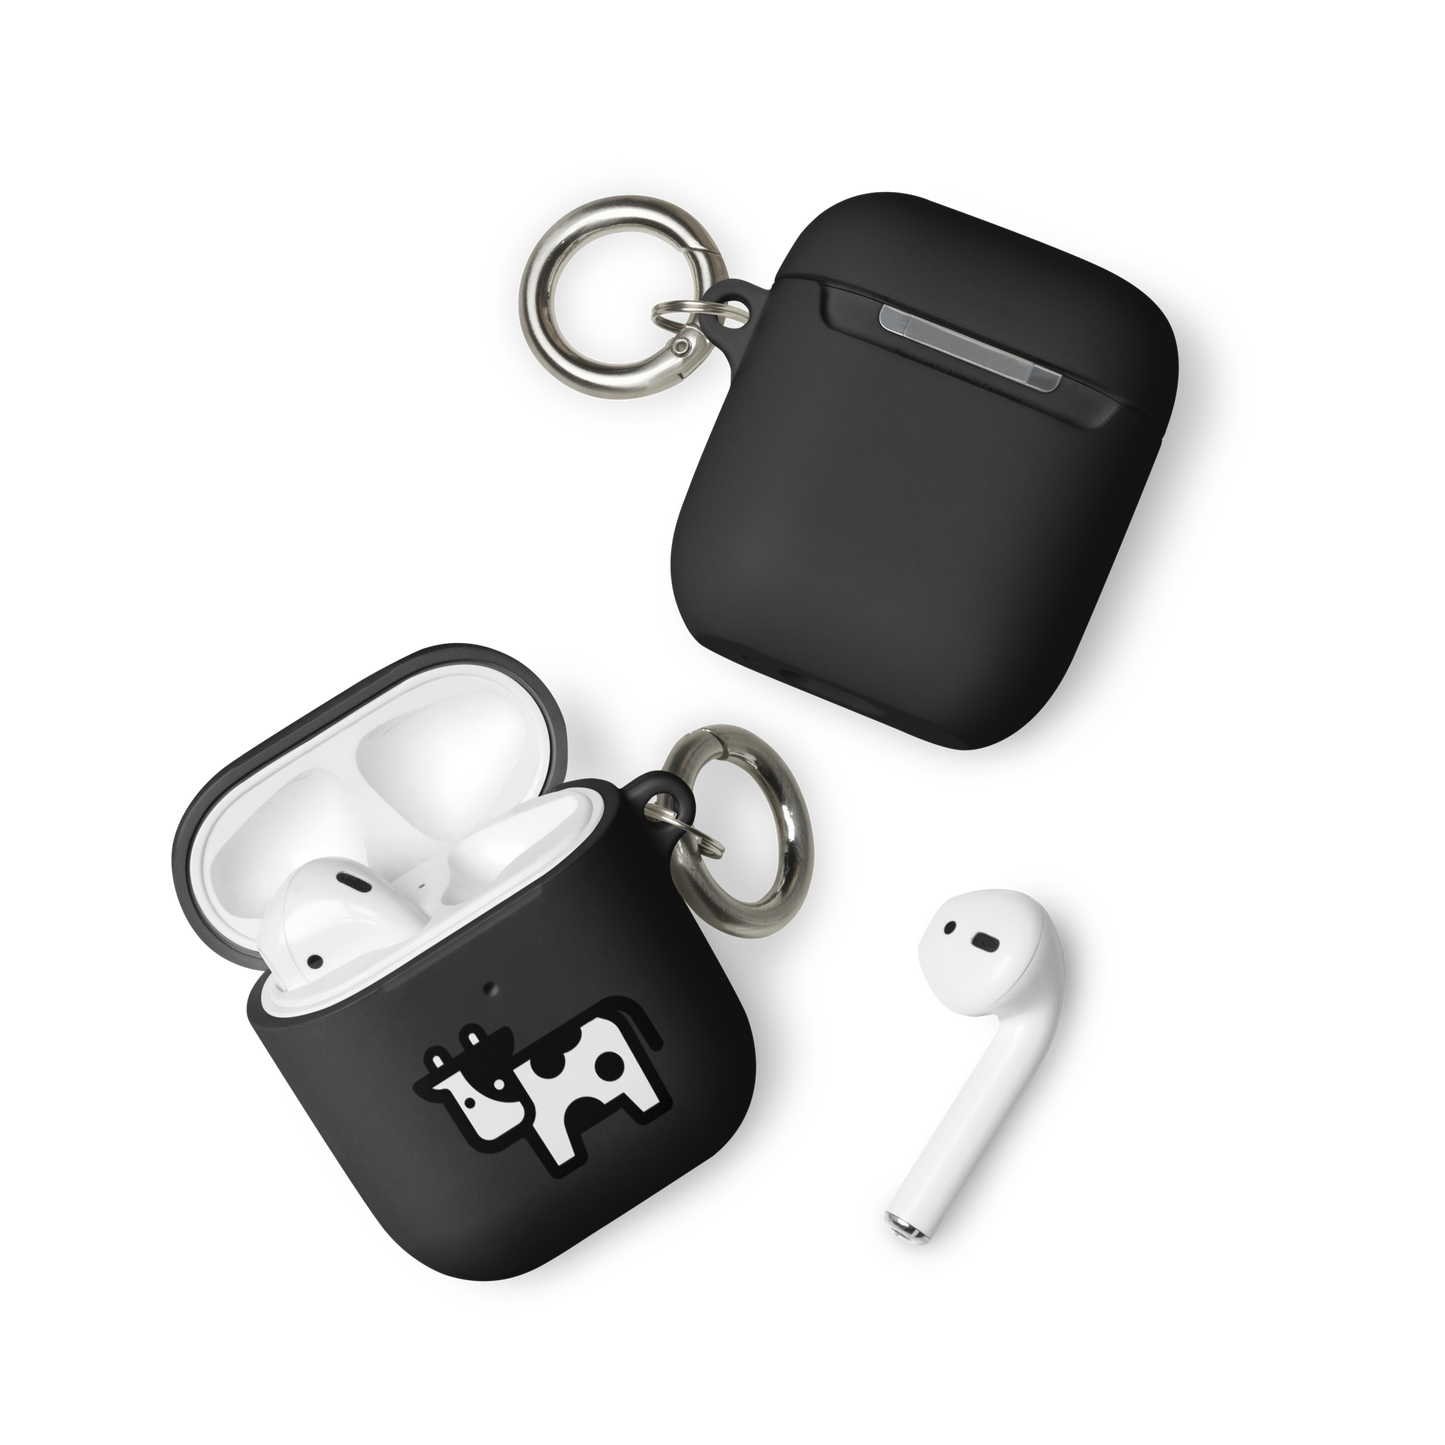 Beefy AirPods case